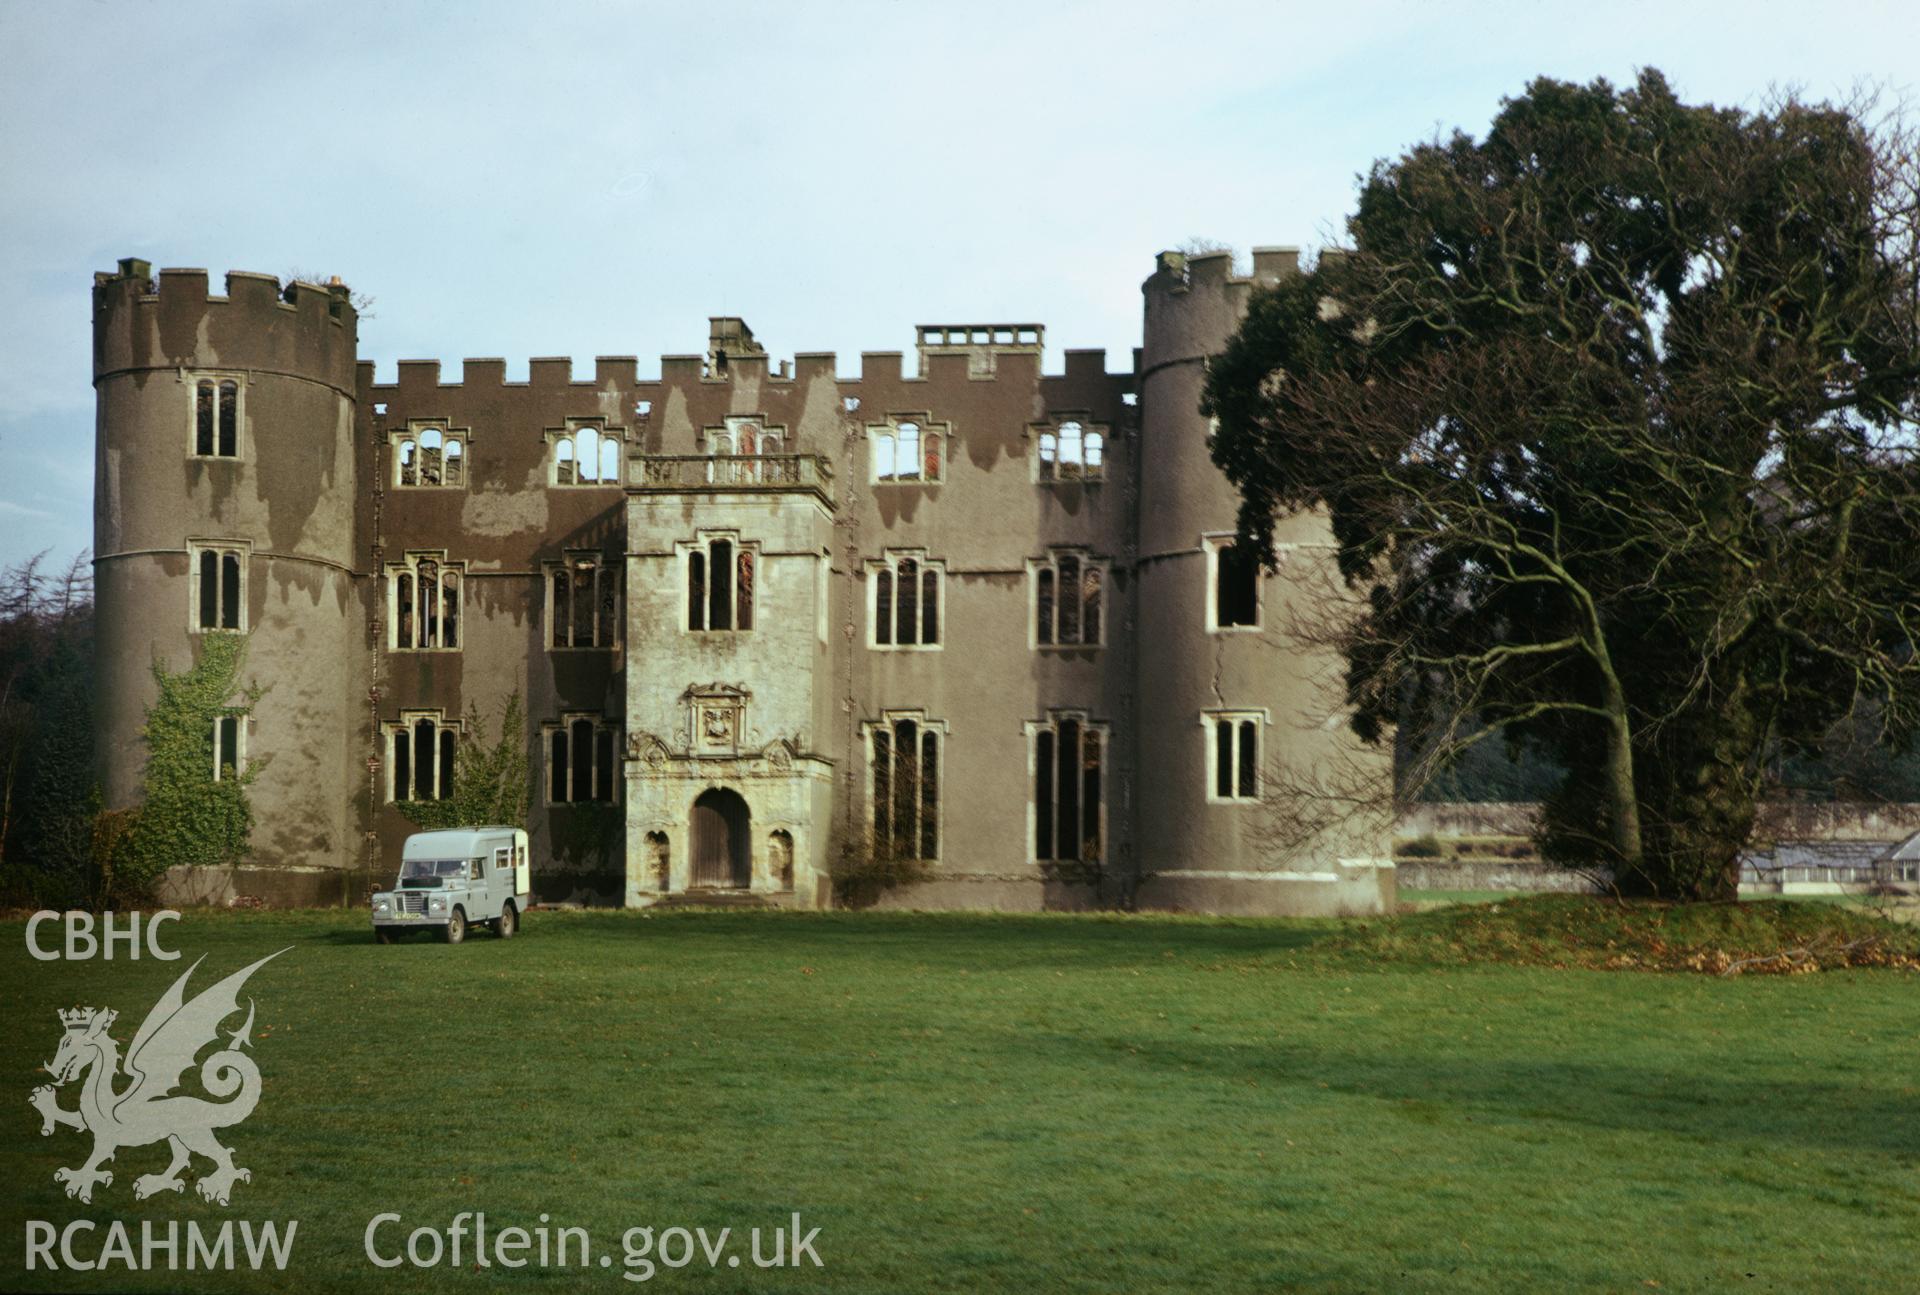 35mm colour slide showing an exterior view of Ruppera Castle, Caerphilly, Glamorgan, produced by Harry Brooksby, June 1977.